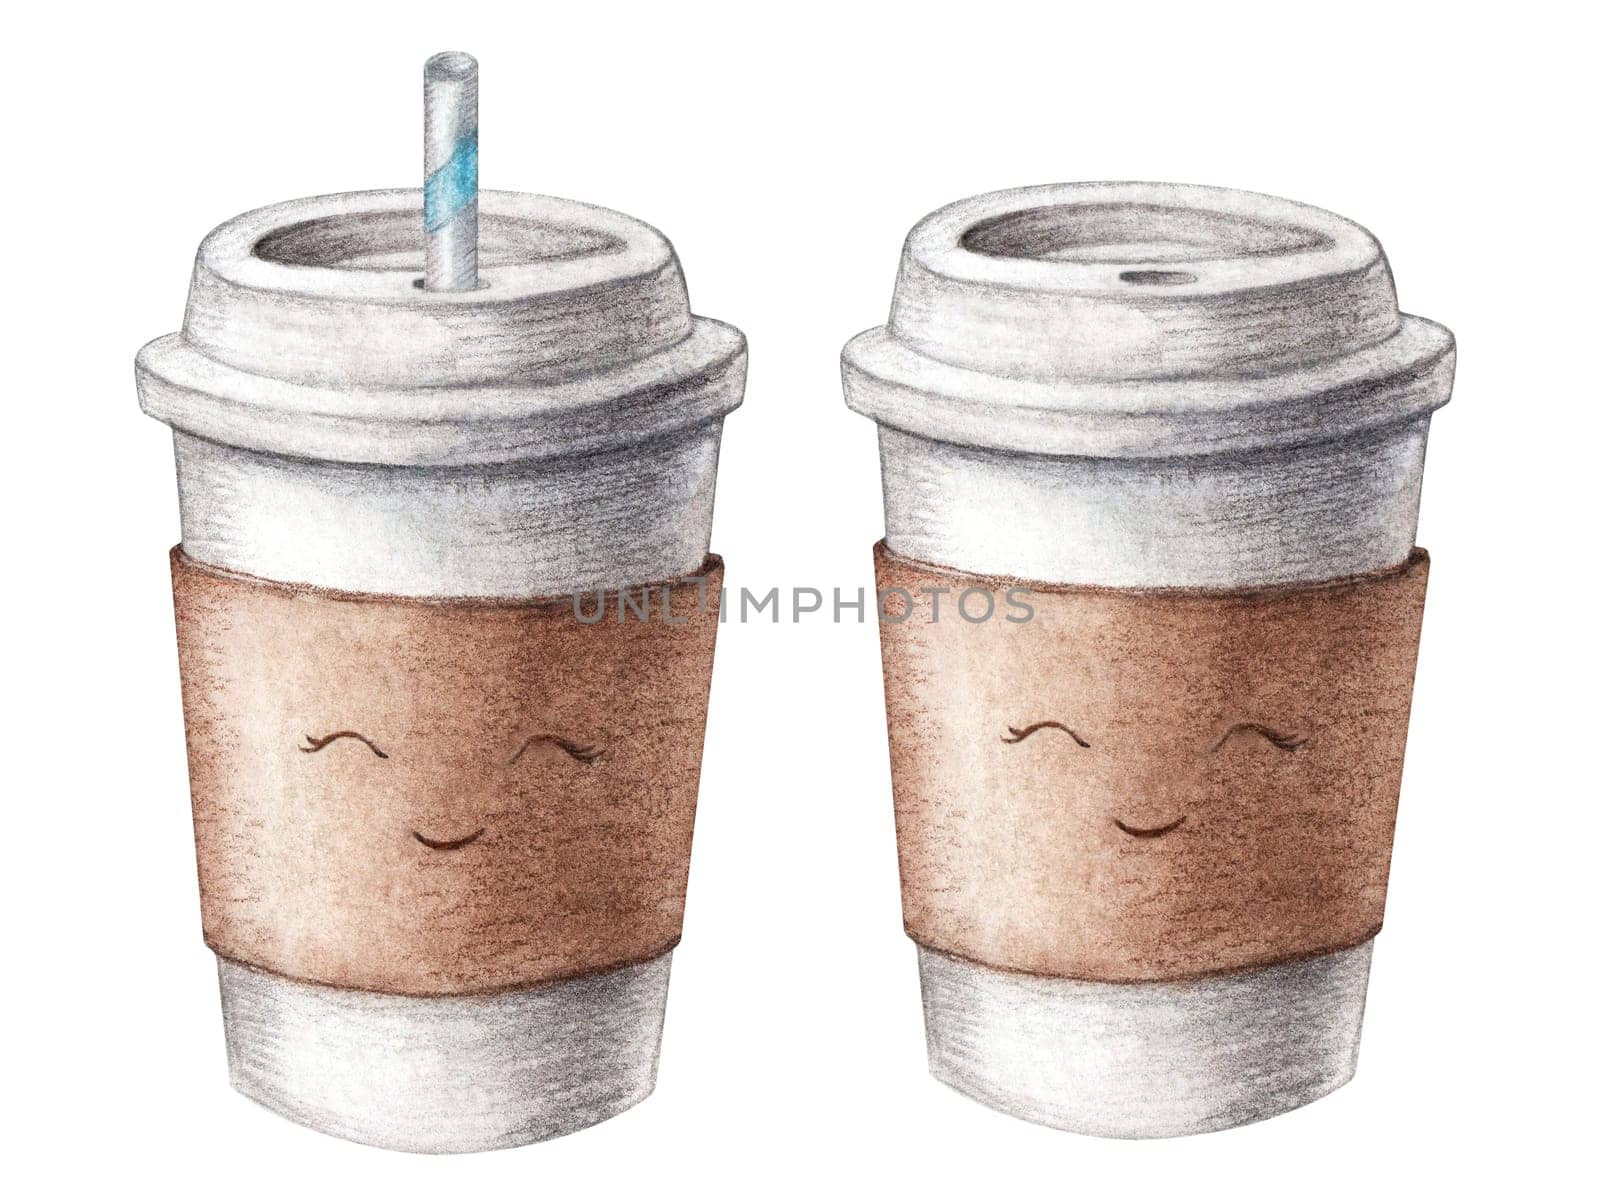 Hand drawn watercolor cardboard paper cute coffee cup set with a tubule straw, take away, isolated on white background. Food illustration, coffee to go. Watercolor painting by Anny_Sketches